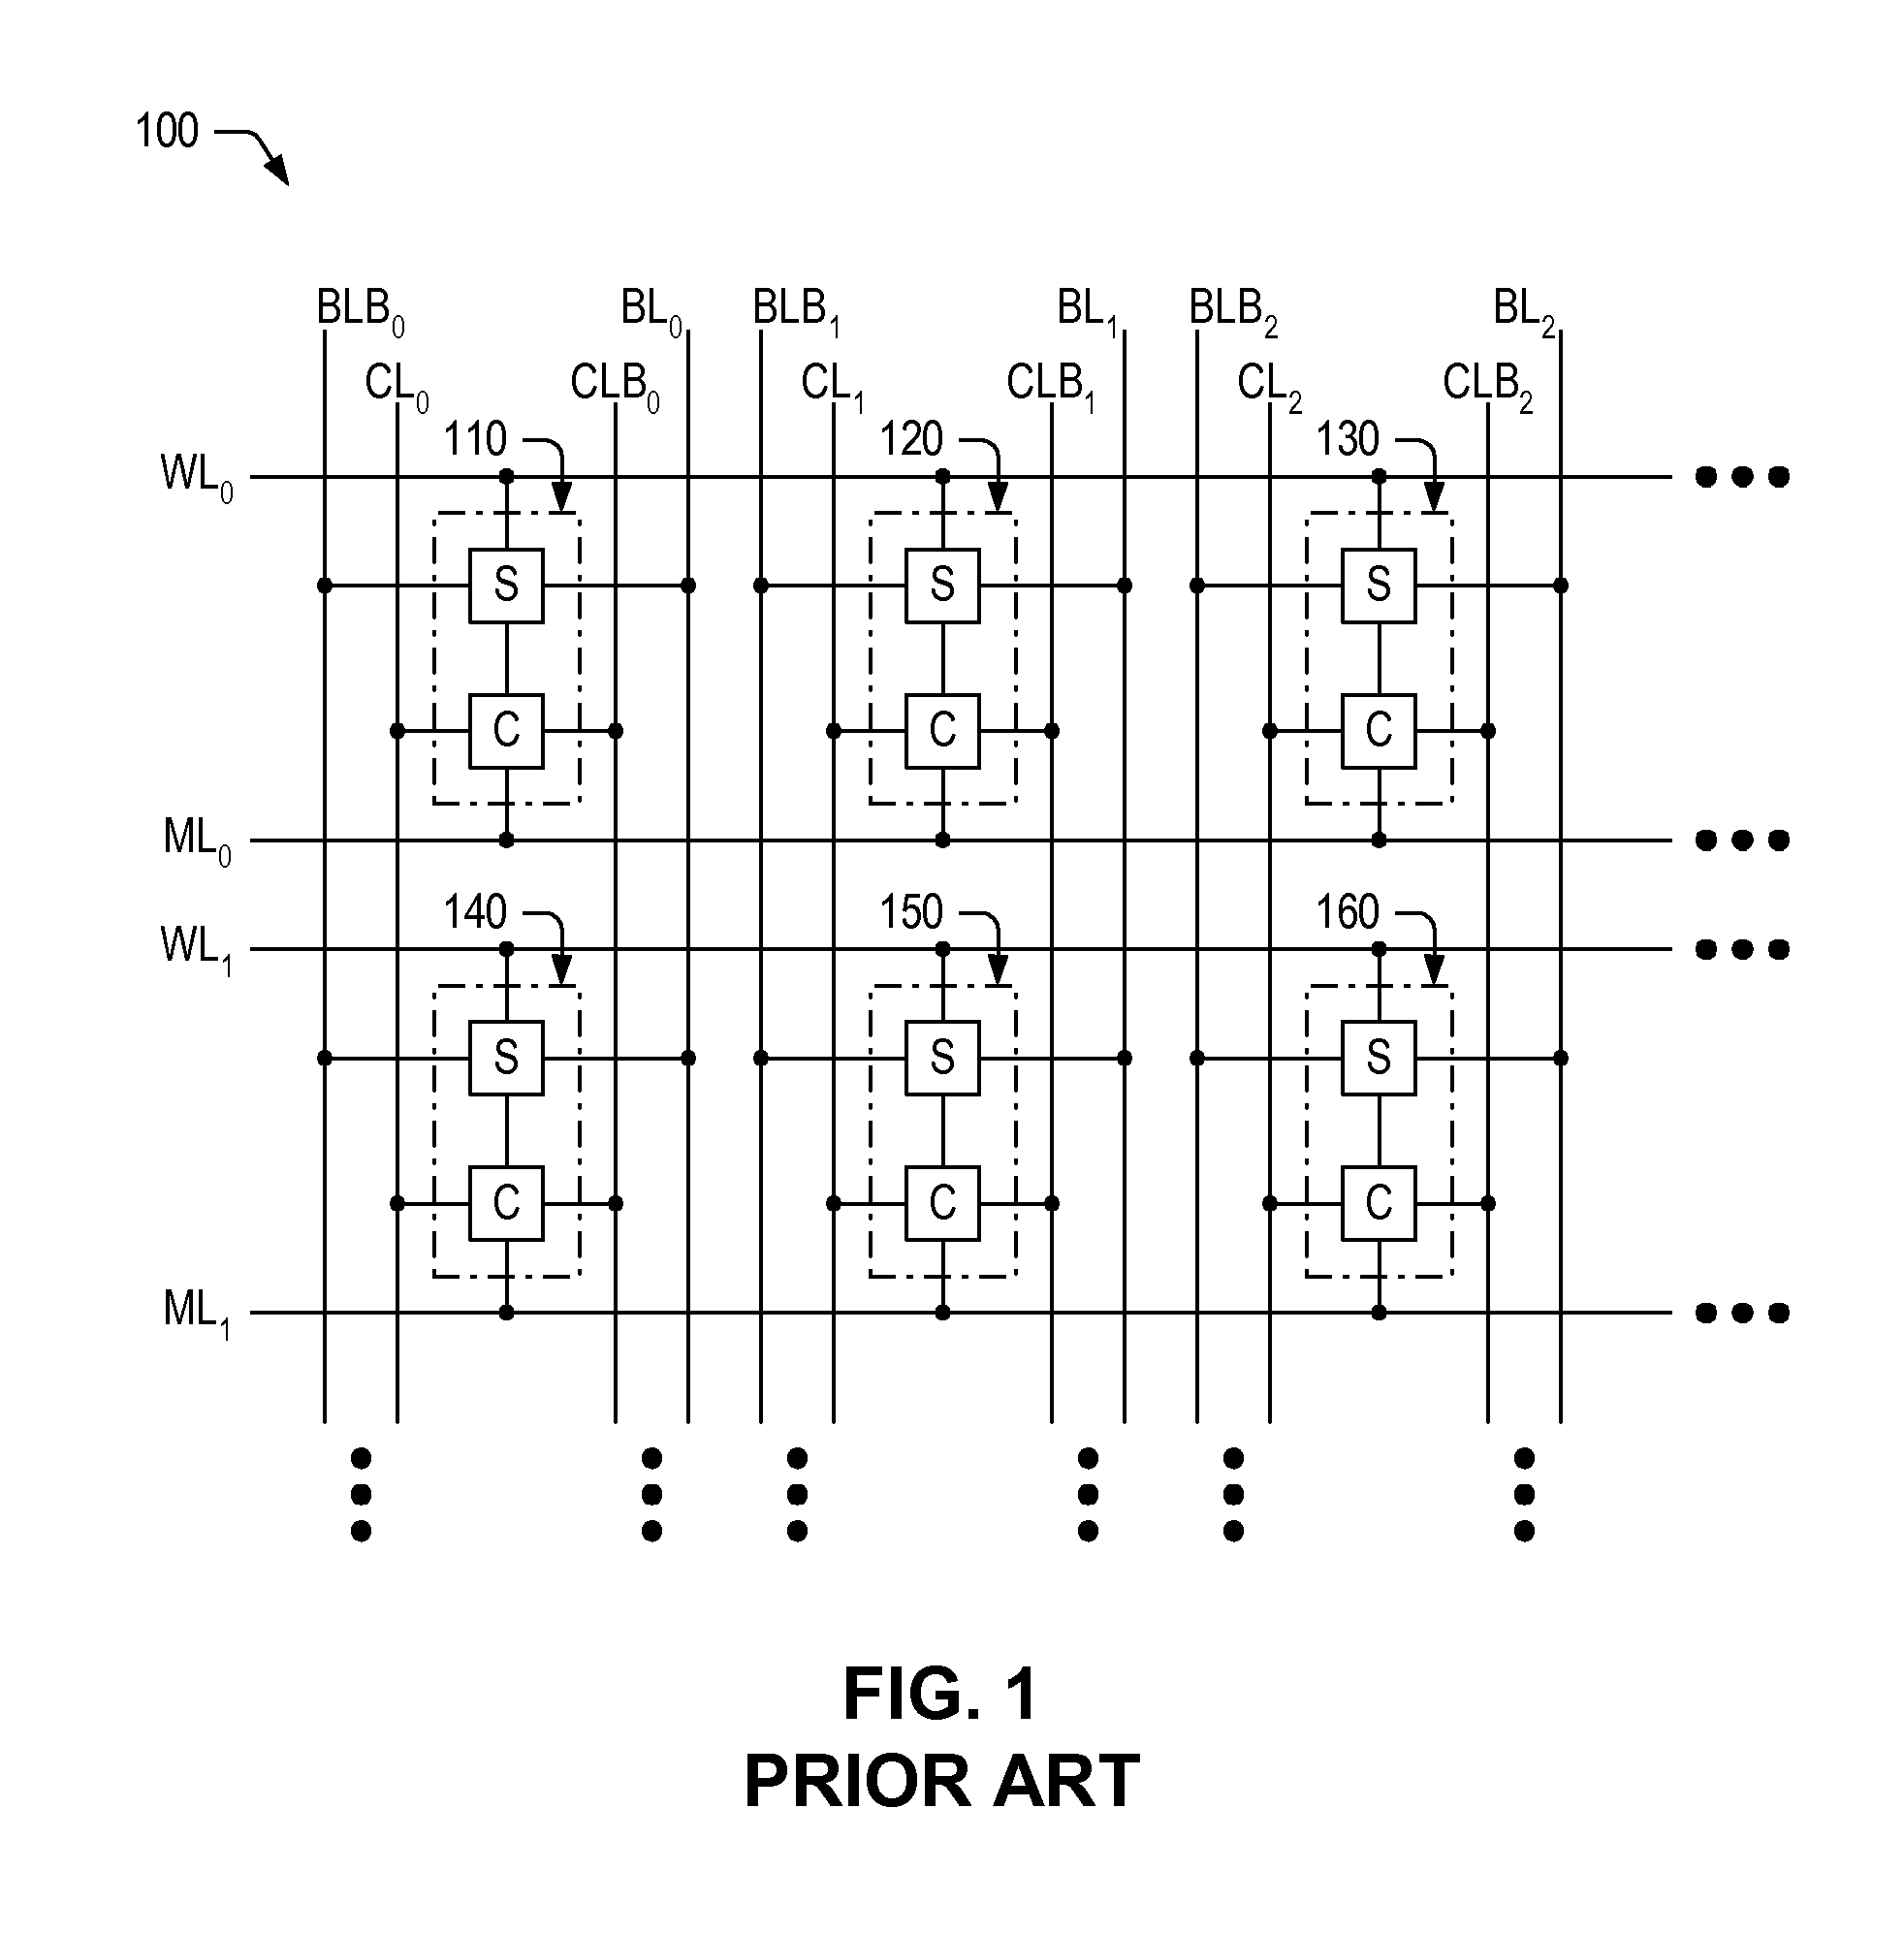 Content addressable memory (CAM) architecture and method of operating the same